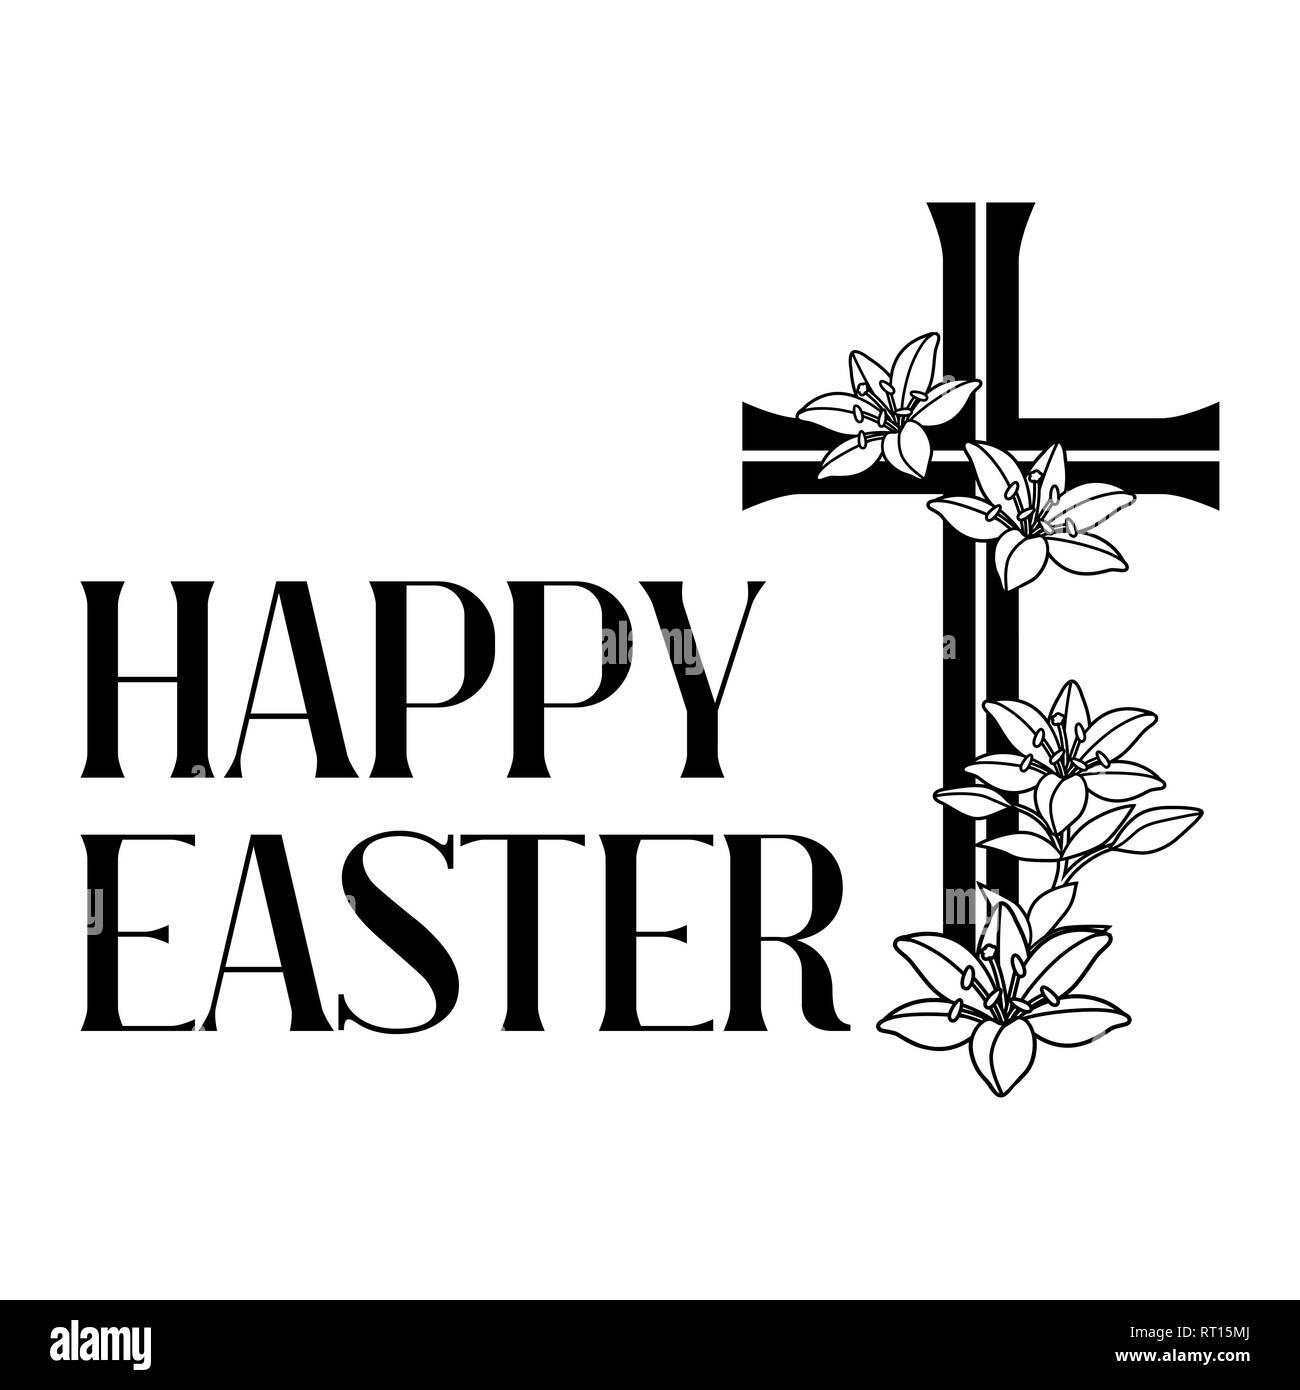 Happy Easter concept illustration. Cross and lilies. Stock Vector